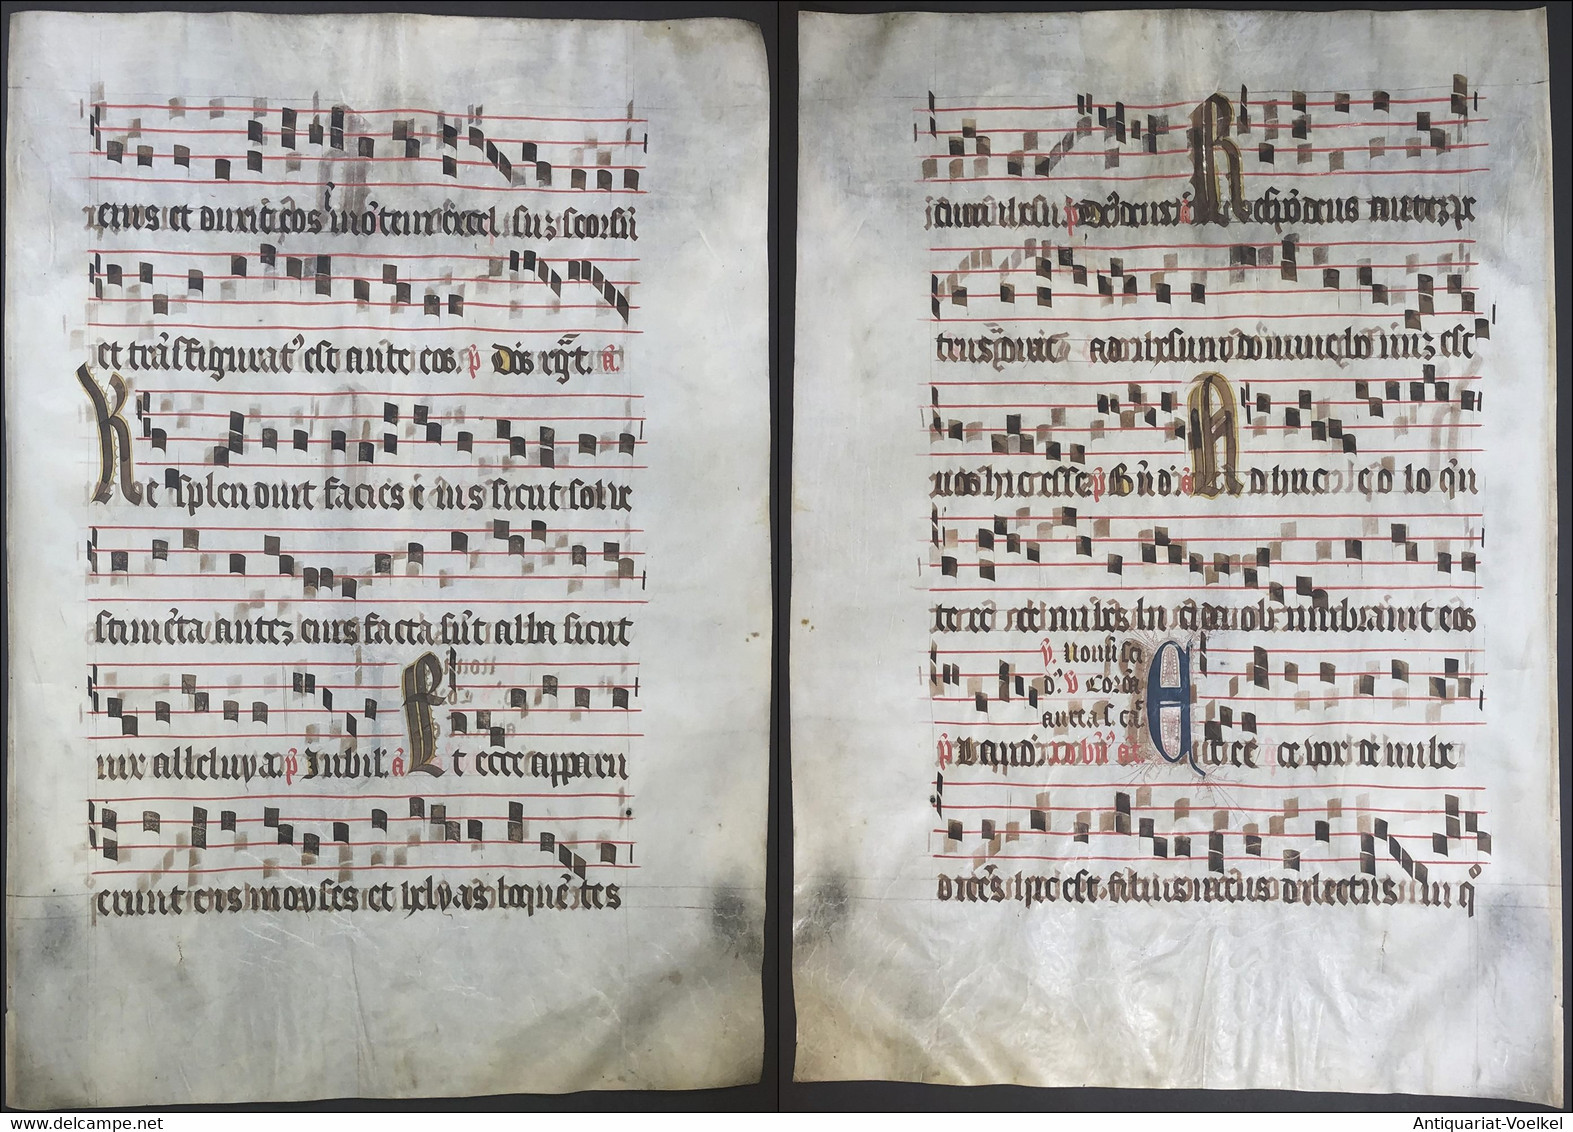 Very Rare Large Elephant Folio Vellum Sheet. Out Of An Antiphonary Manuscript From The 15th Century. / Seltene - Theater & Scripts